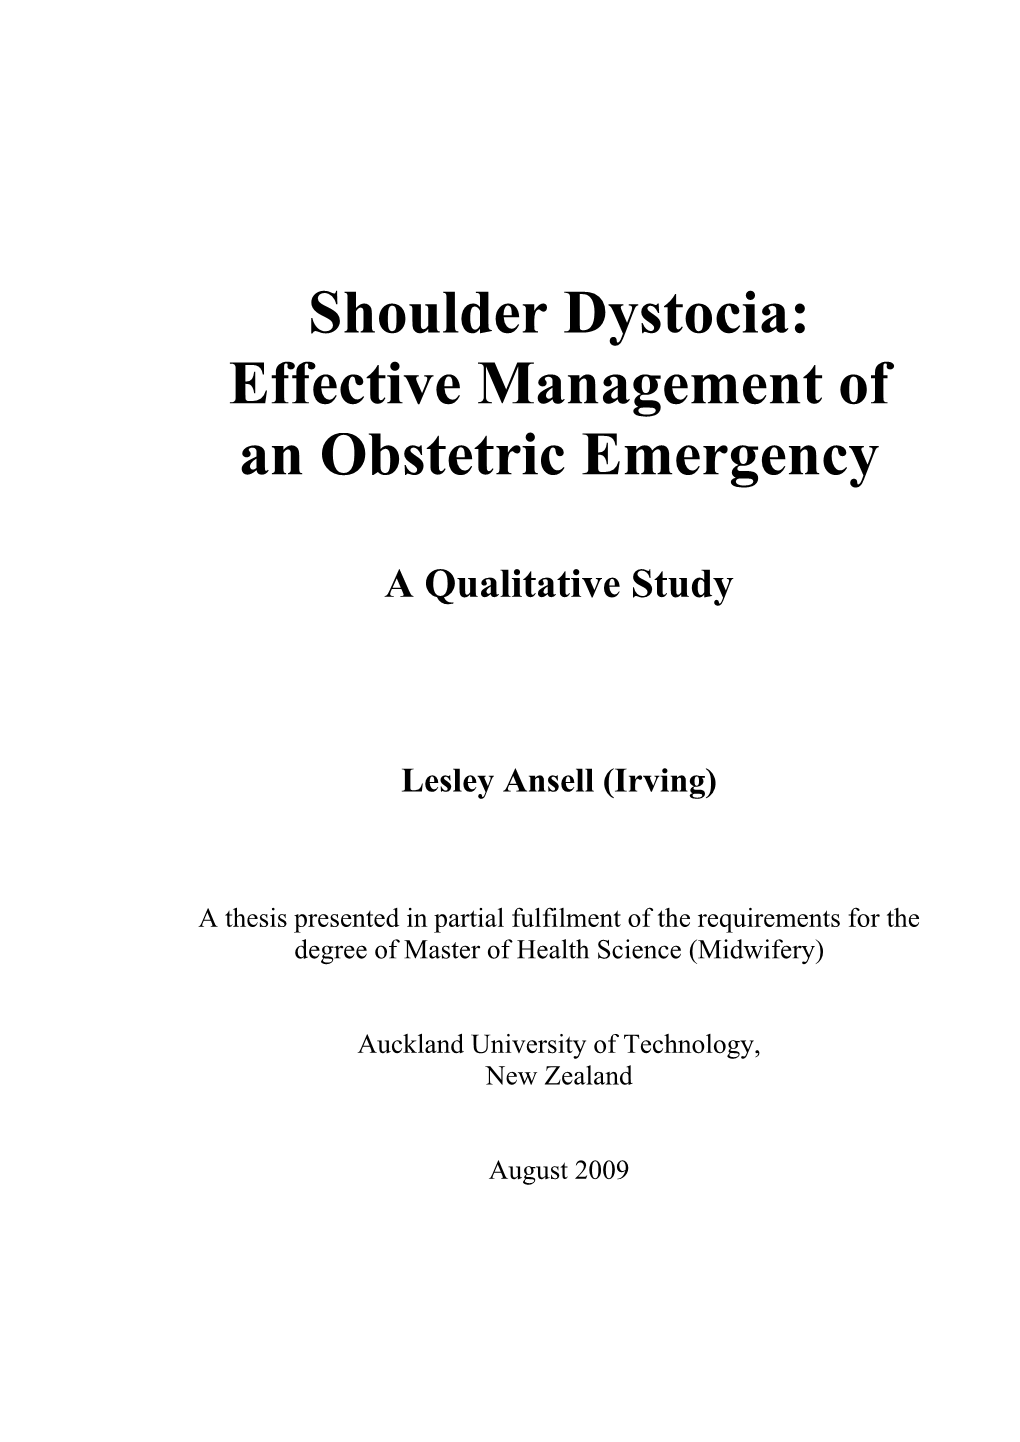 Shoulder Dystocia: Effective Management of an Obstetric Emergency